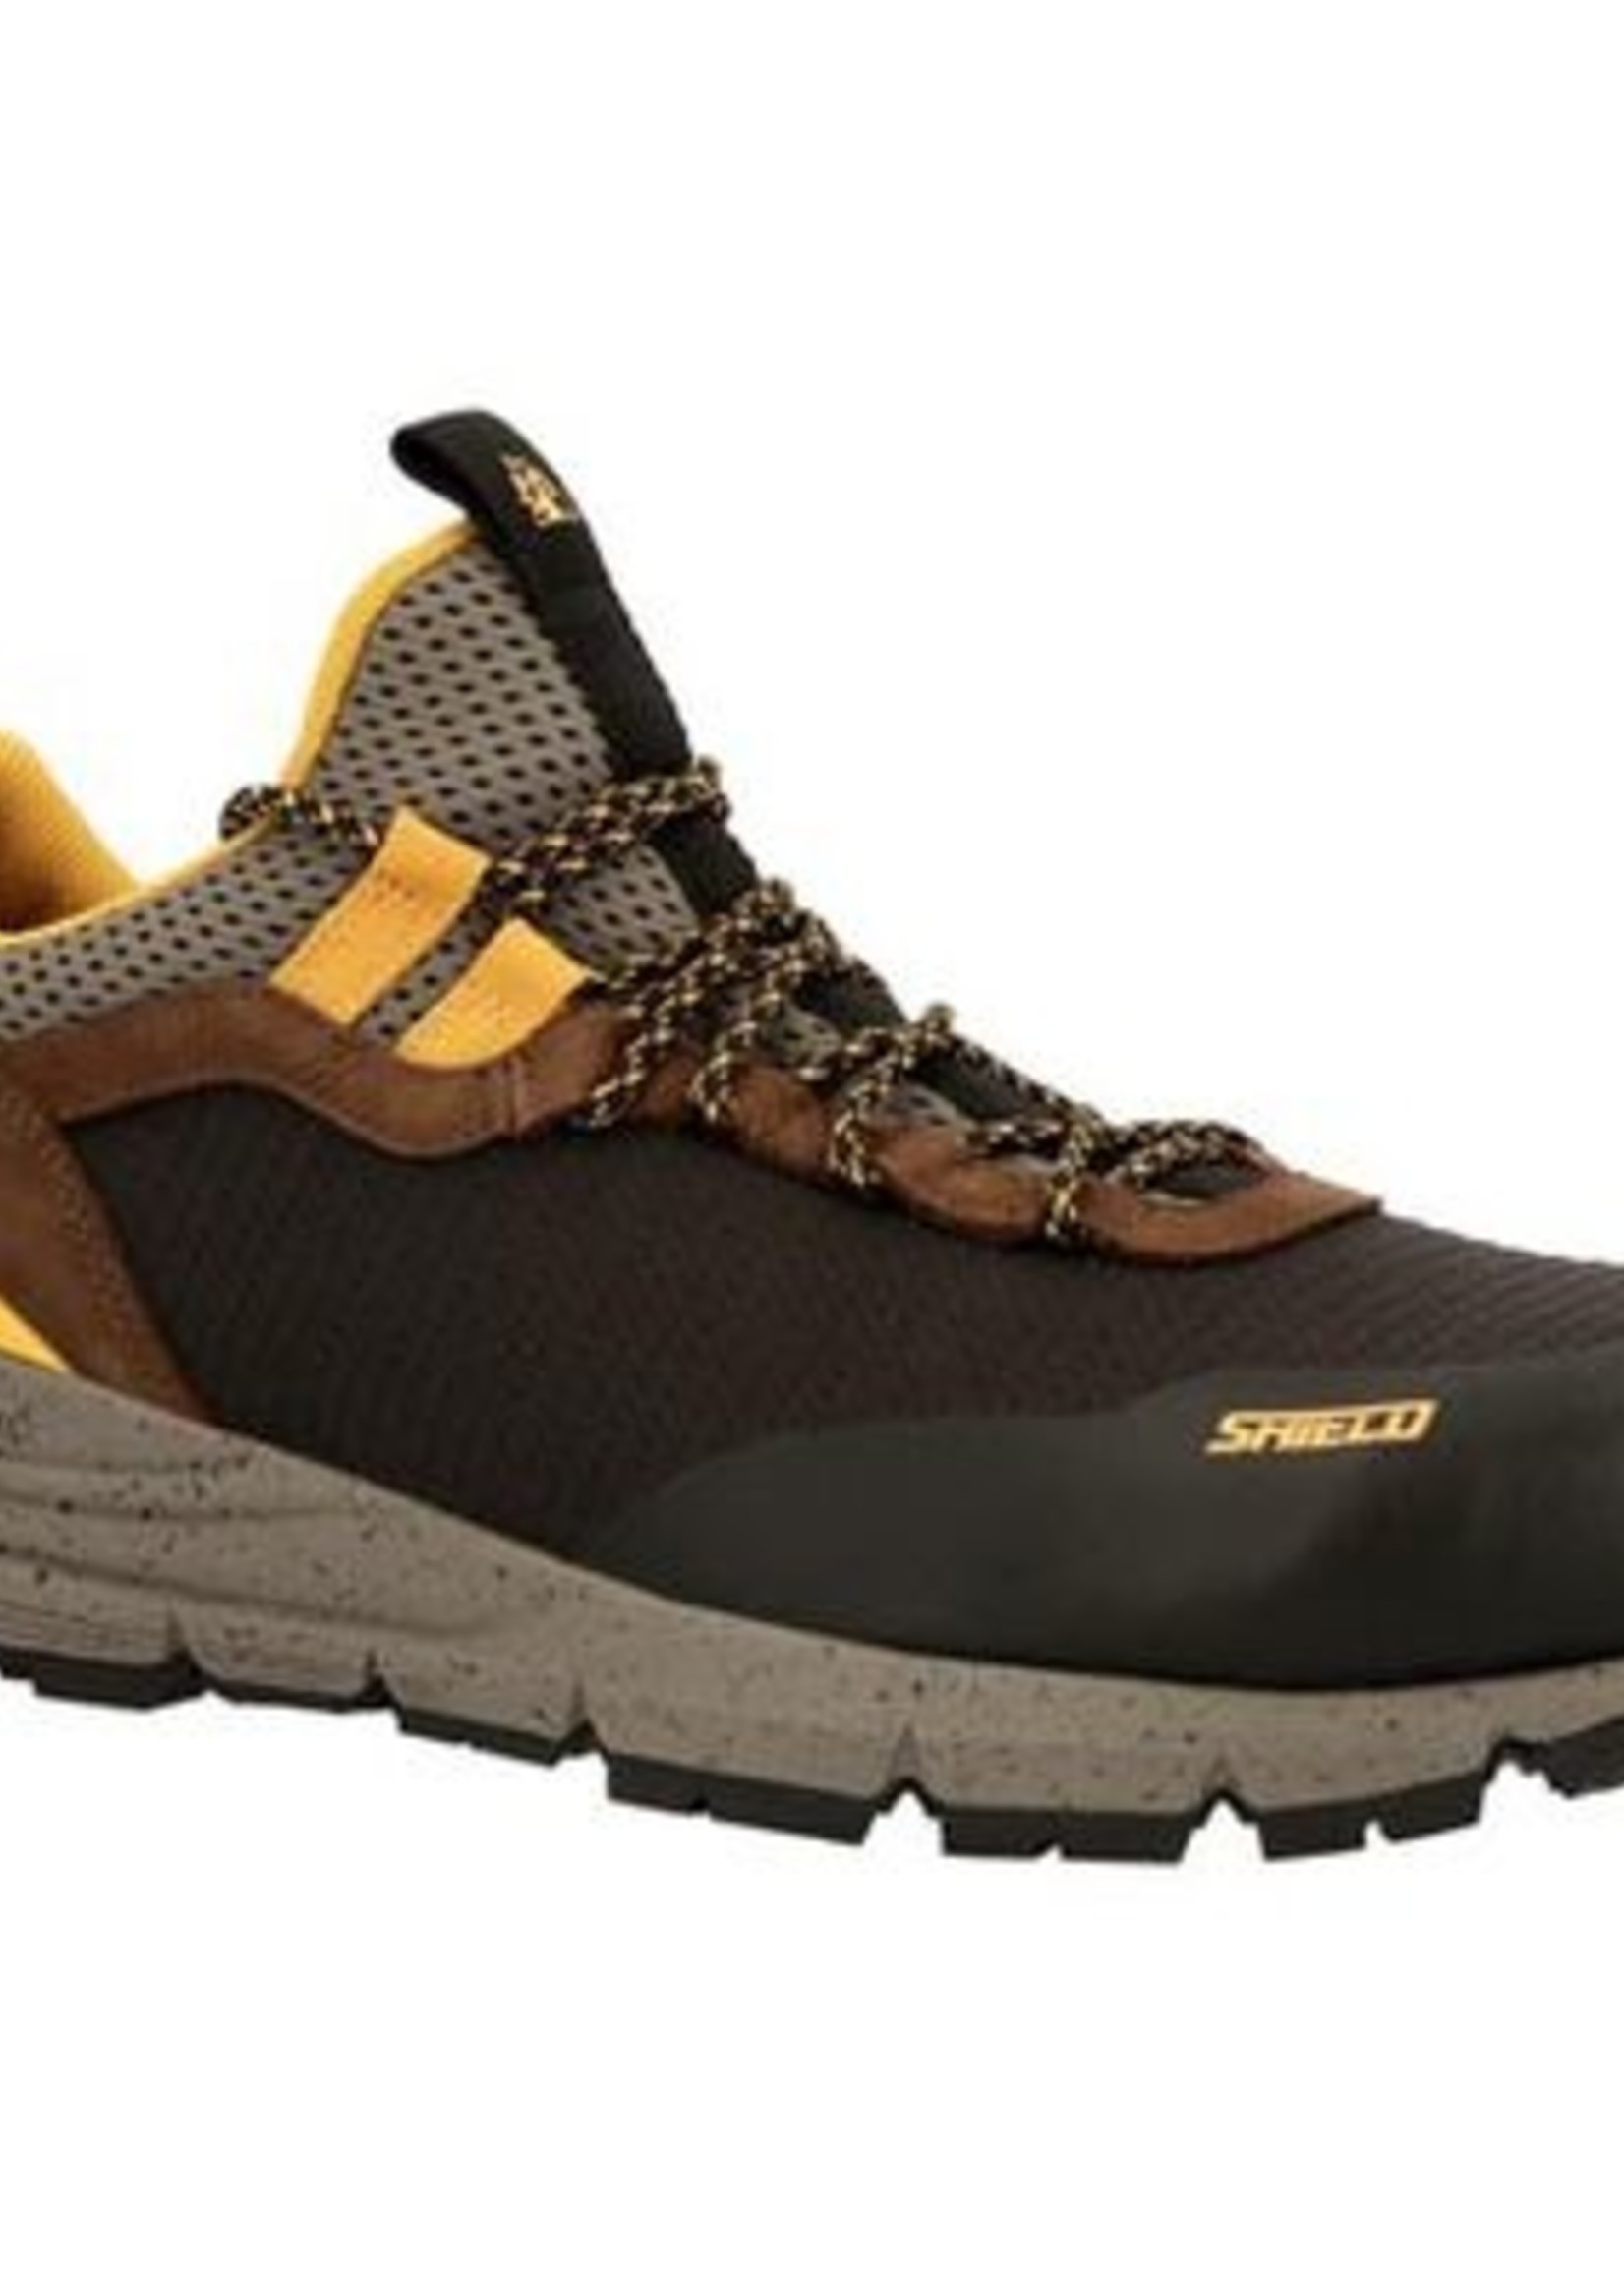 Boots-Men ROCKY RKK0341 Rugged AT Composite Toe Work Sneaker